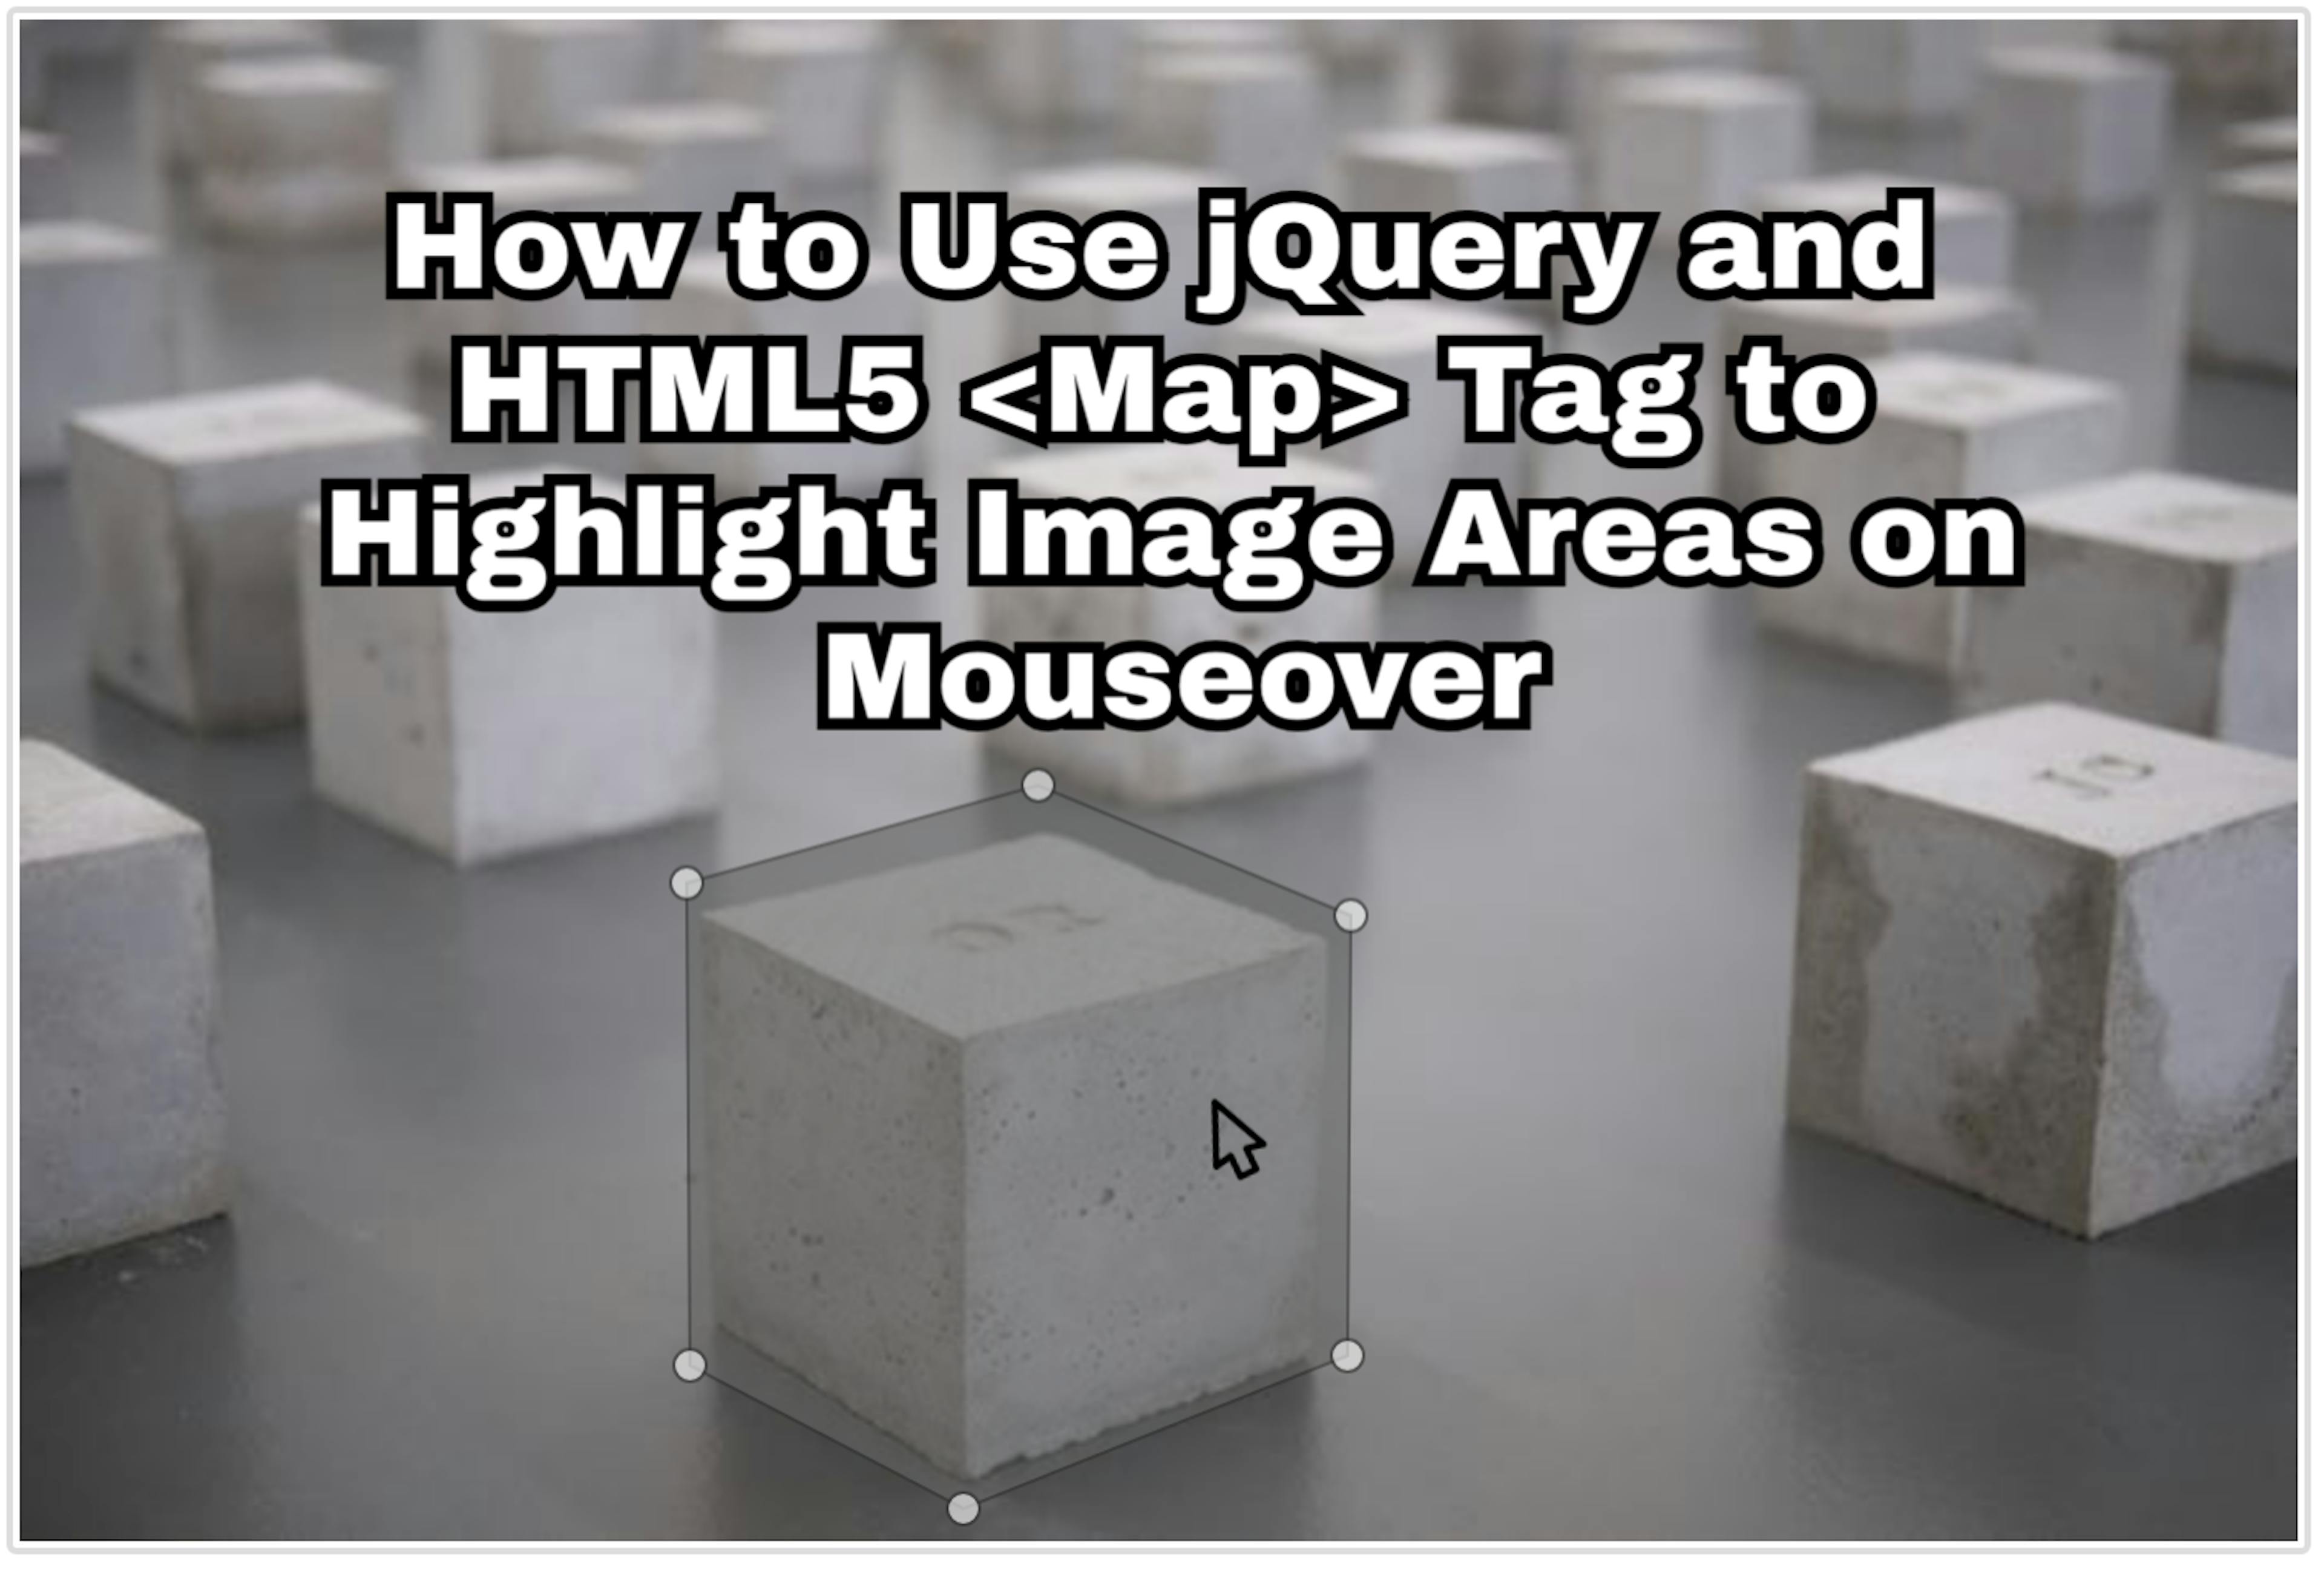 featured image - How to Use jQuery and HTML5 <Map> Tag to Highlight Image Areas on Mouseover